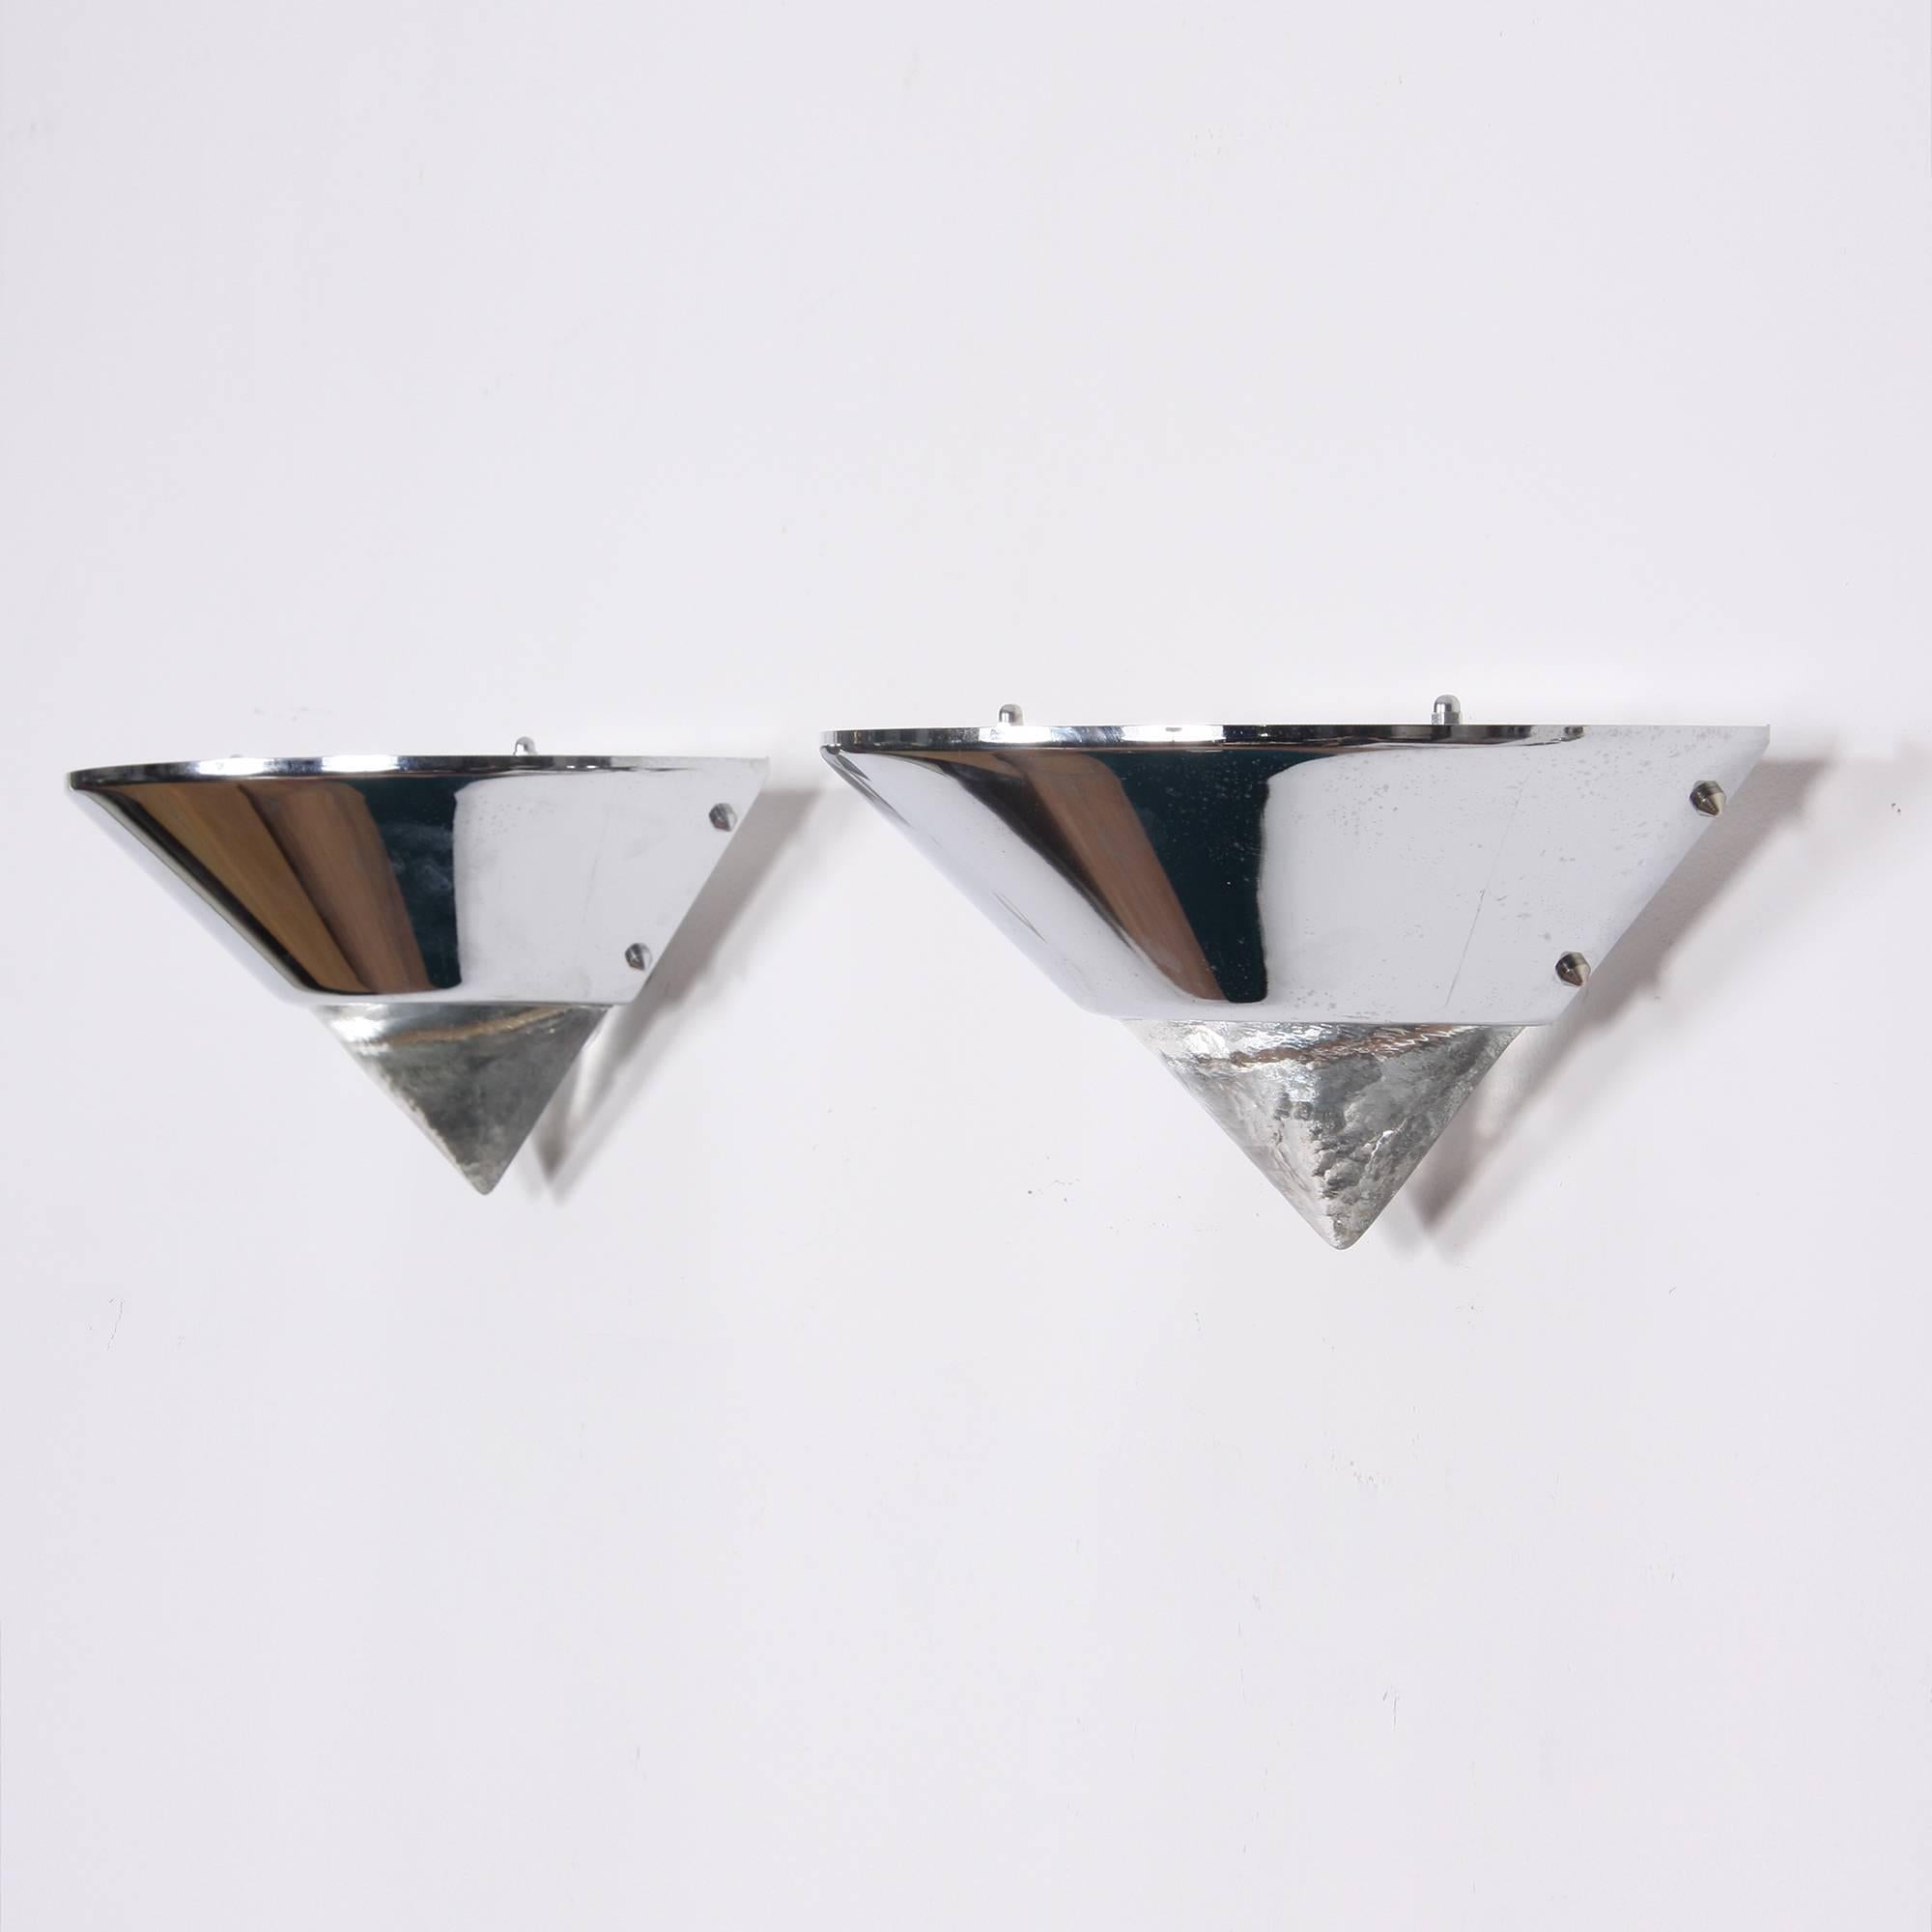 A pair of uplighter wall lights in a triangular shape. Solid glass on the lower part with a chromed metal upper part. Includes re-wiring.